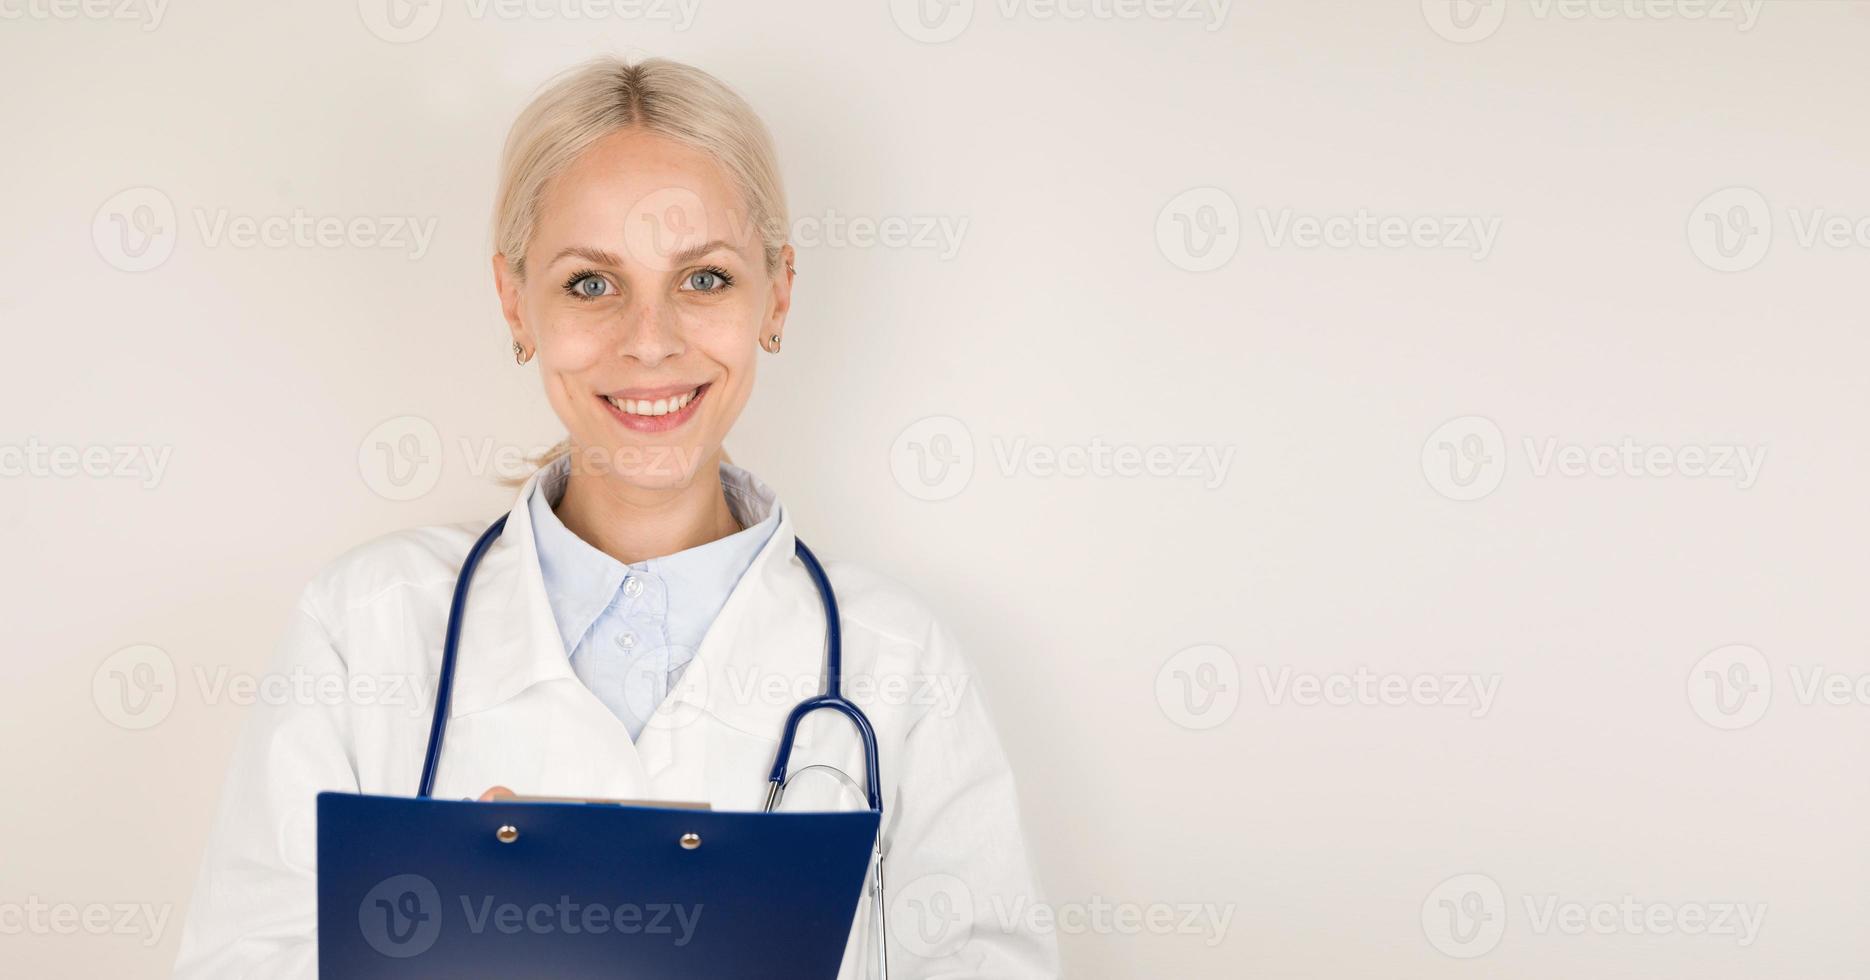 Young happy female doctor in medical coat with stethoscope smiling with tablet in her hands.Copy space banner photo